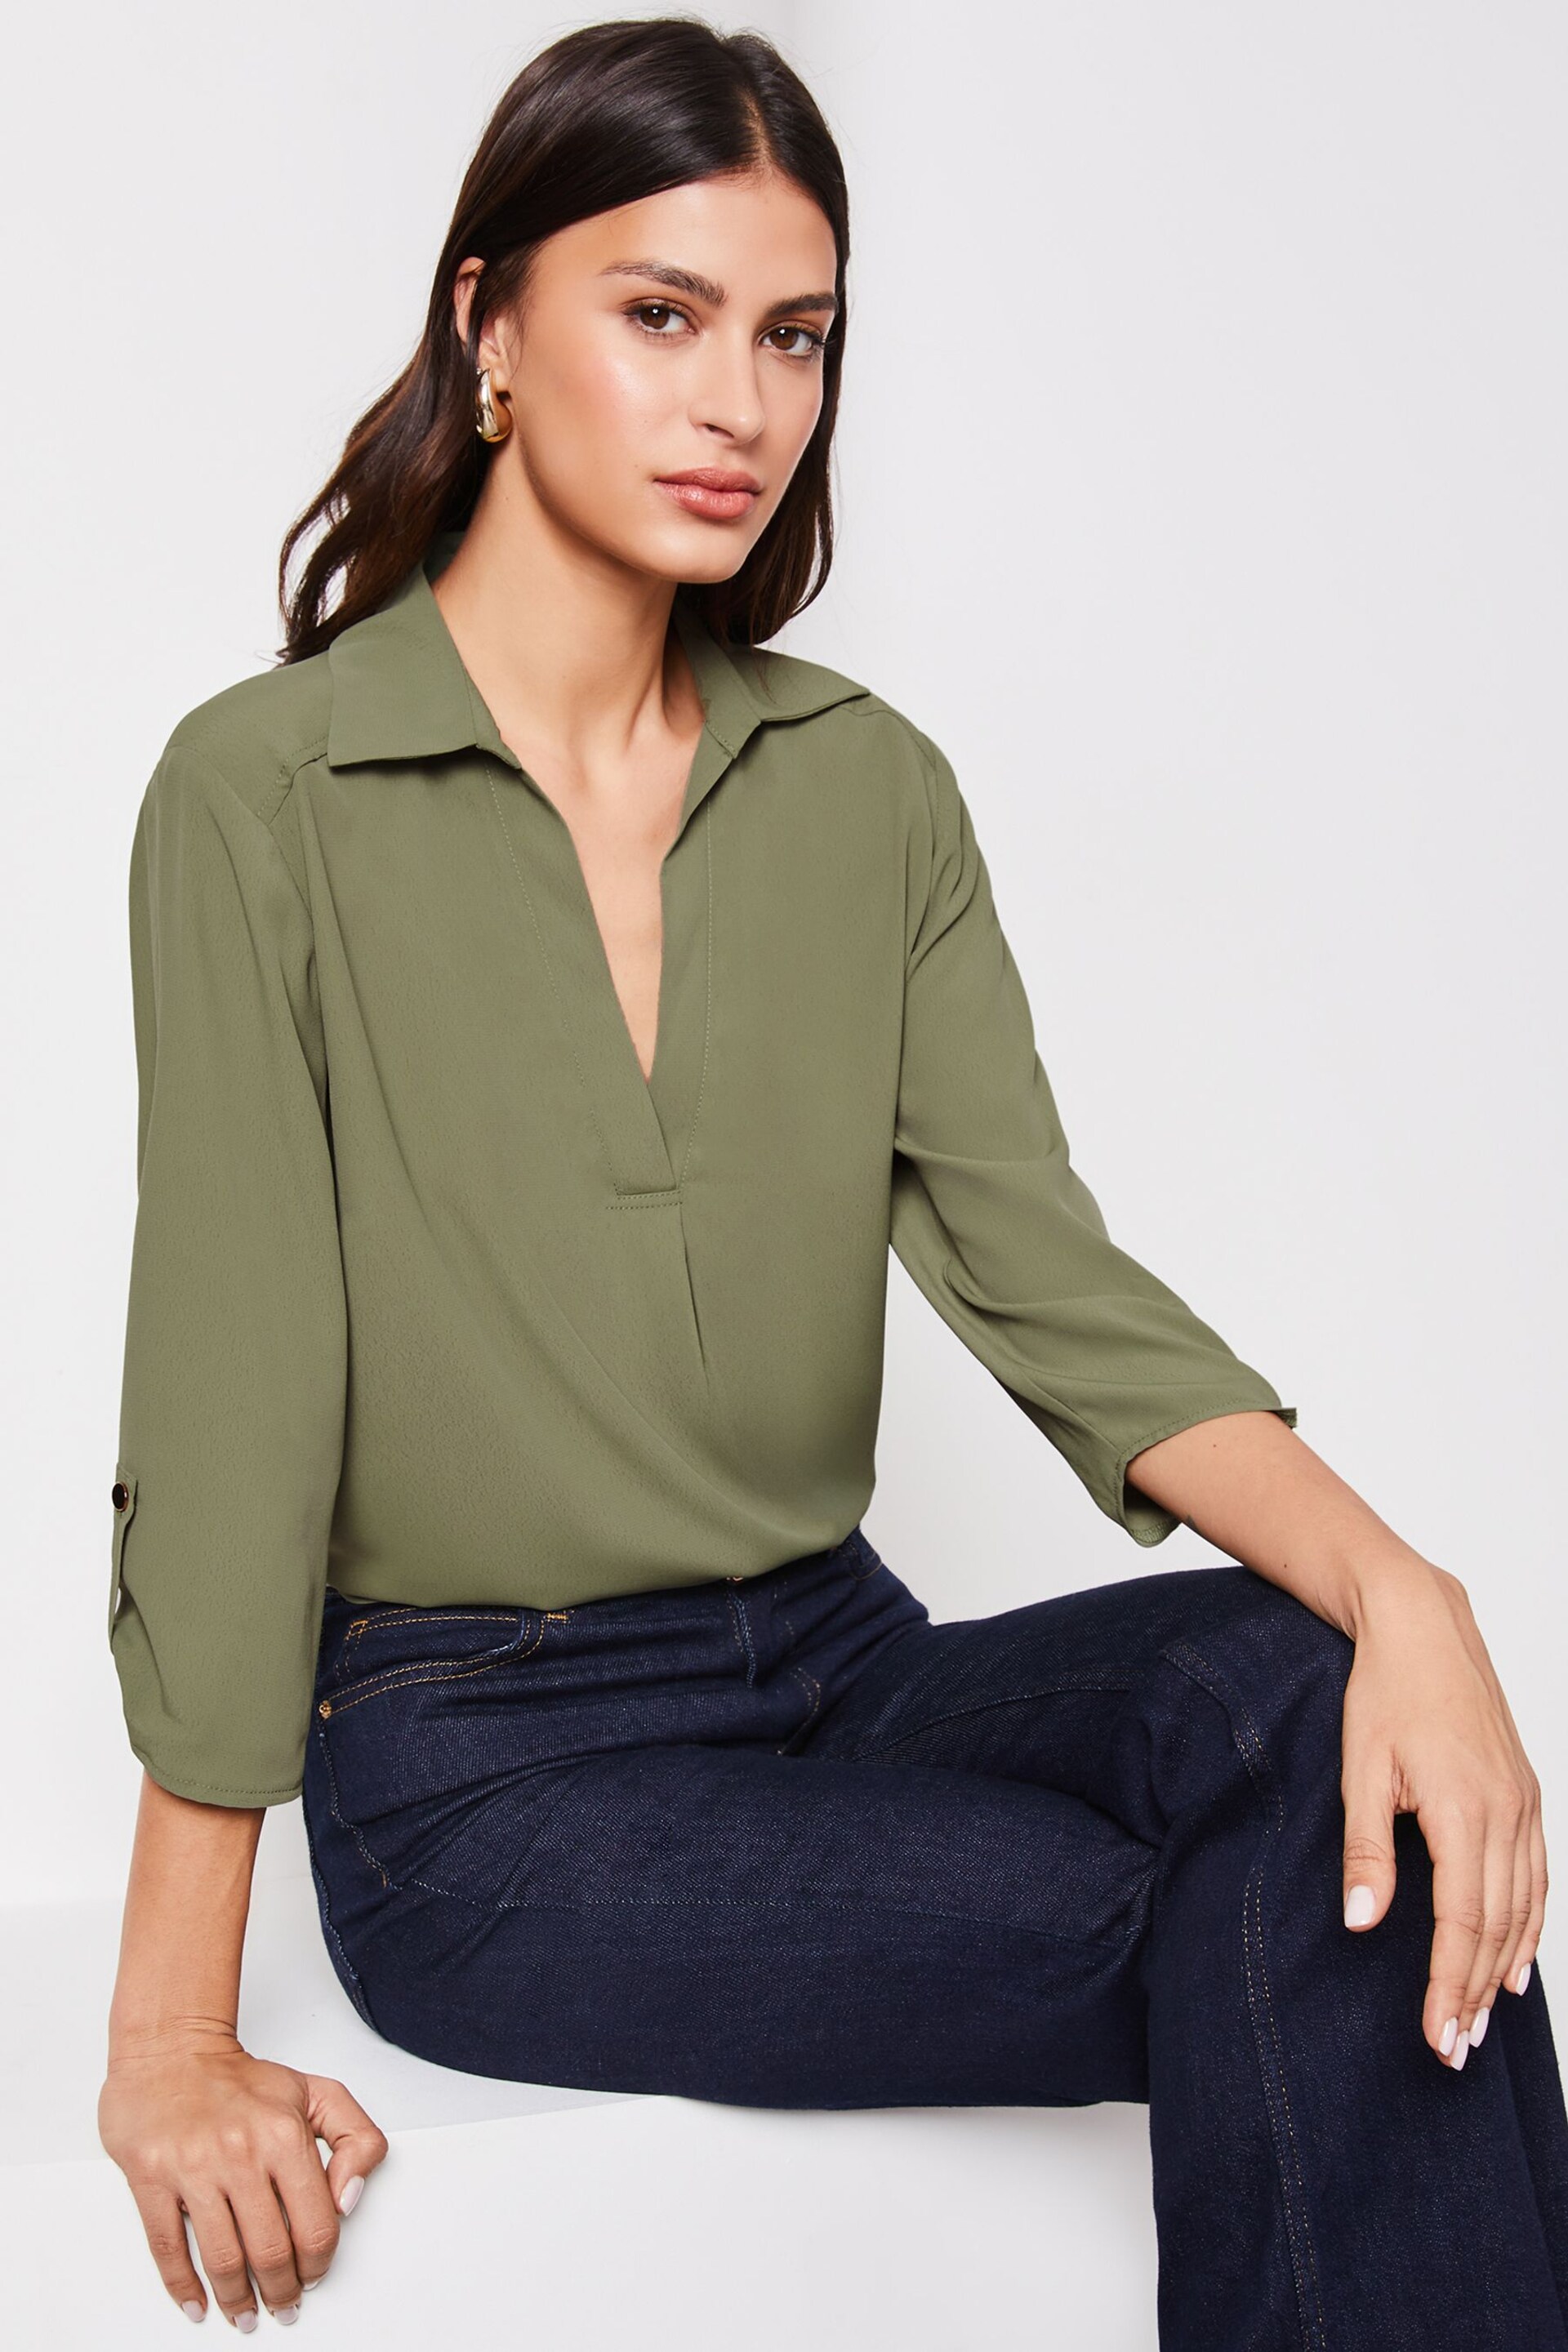 Lipsy Moss Green Petite V Neck 3/4 Sleeve Collared Blouse - Image 4 of 4